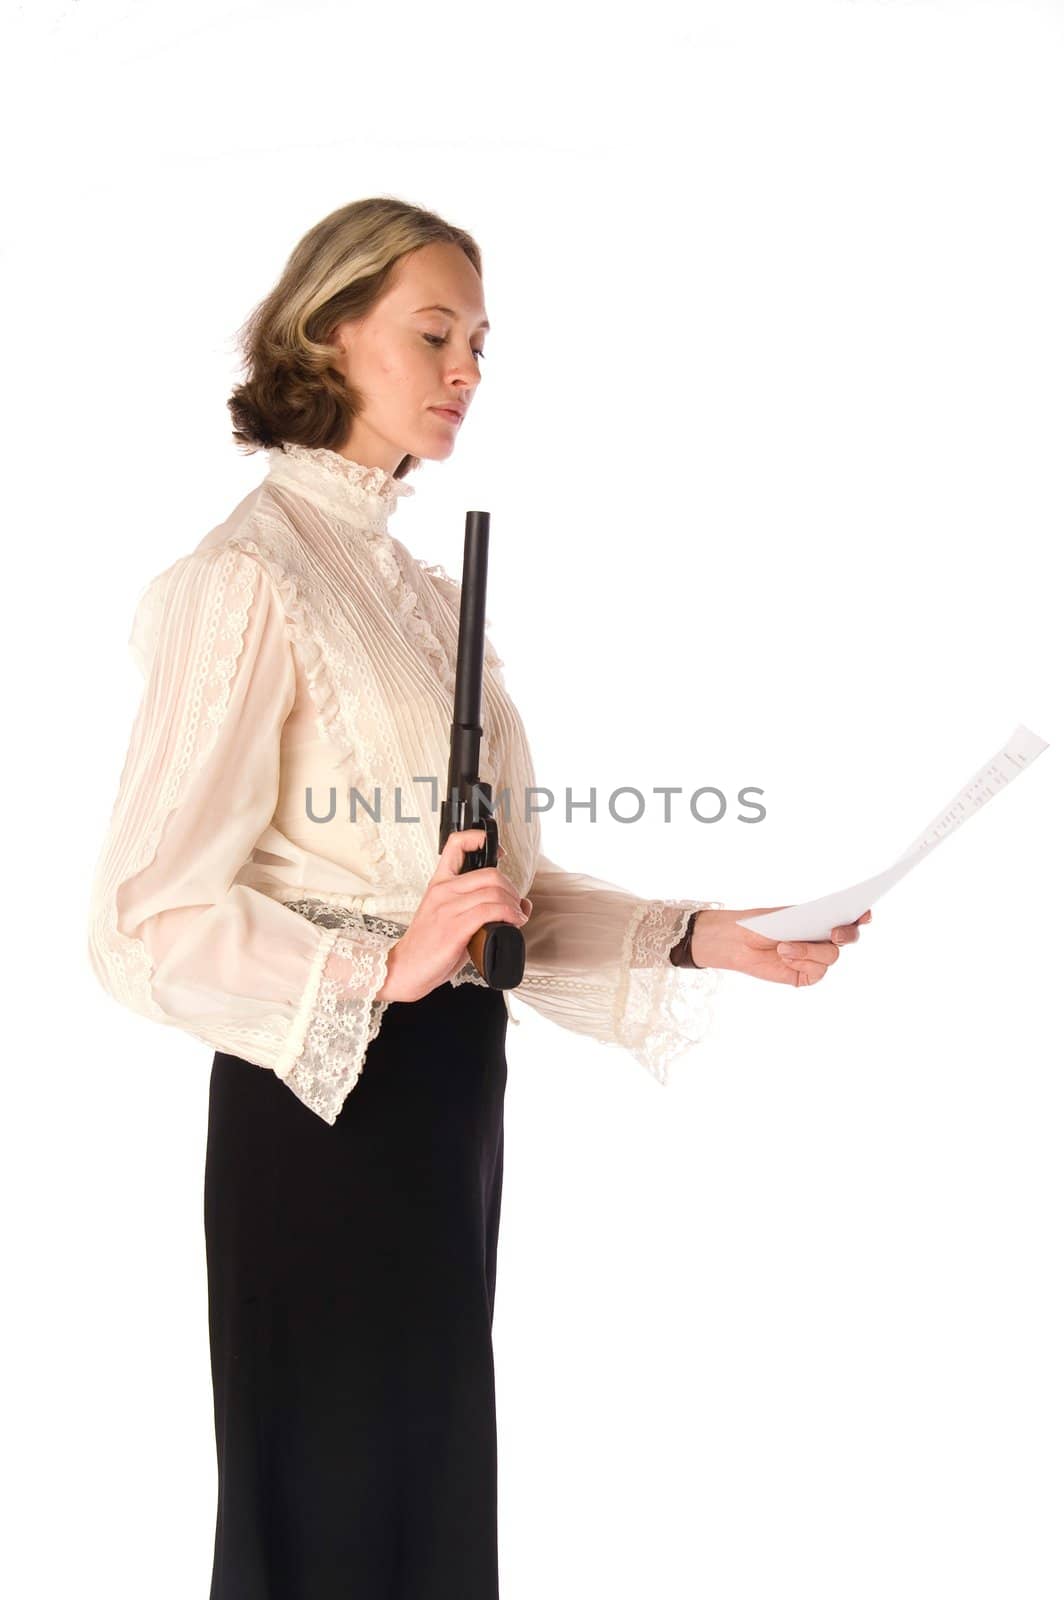 Resolute woman with gun and papers: she kill all business rivals and win contract!
(isolated on white)